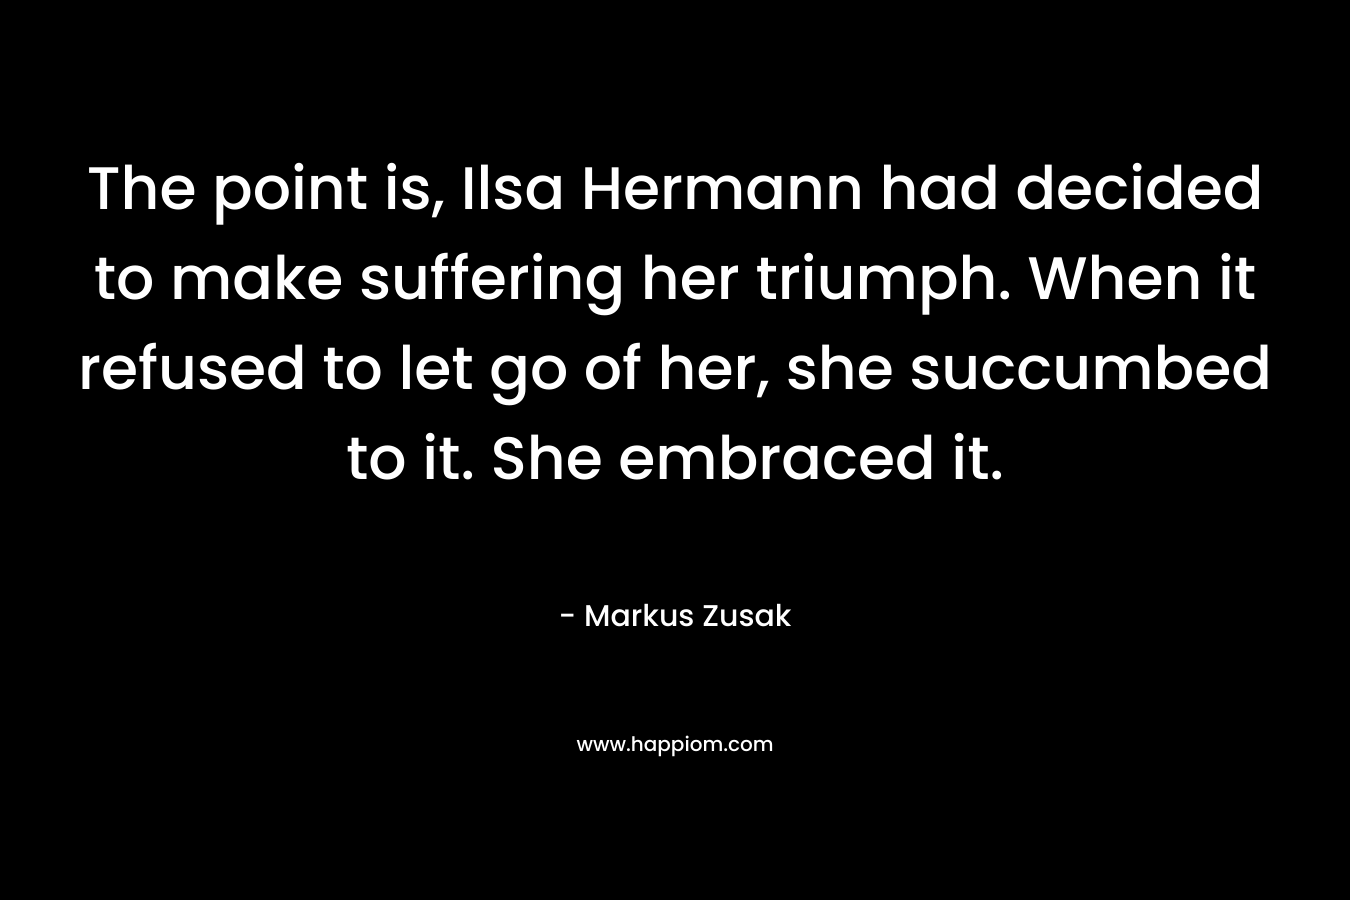 The point is, Ilsa Hermann had decided to make suffering her triumph. When it refused to let go of her, she succumbed to it. She embraced it. 